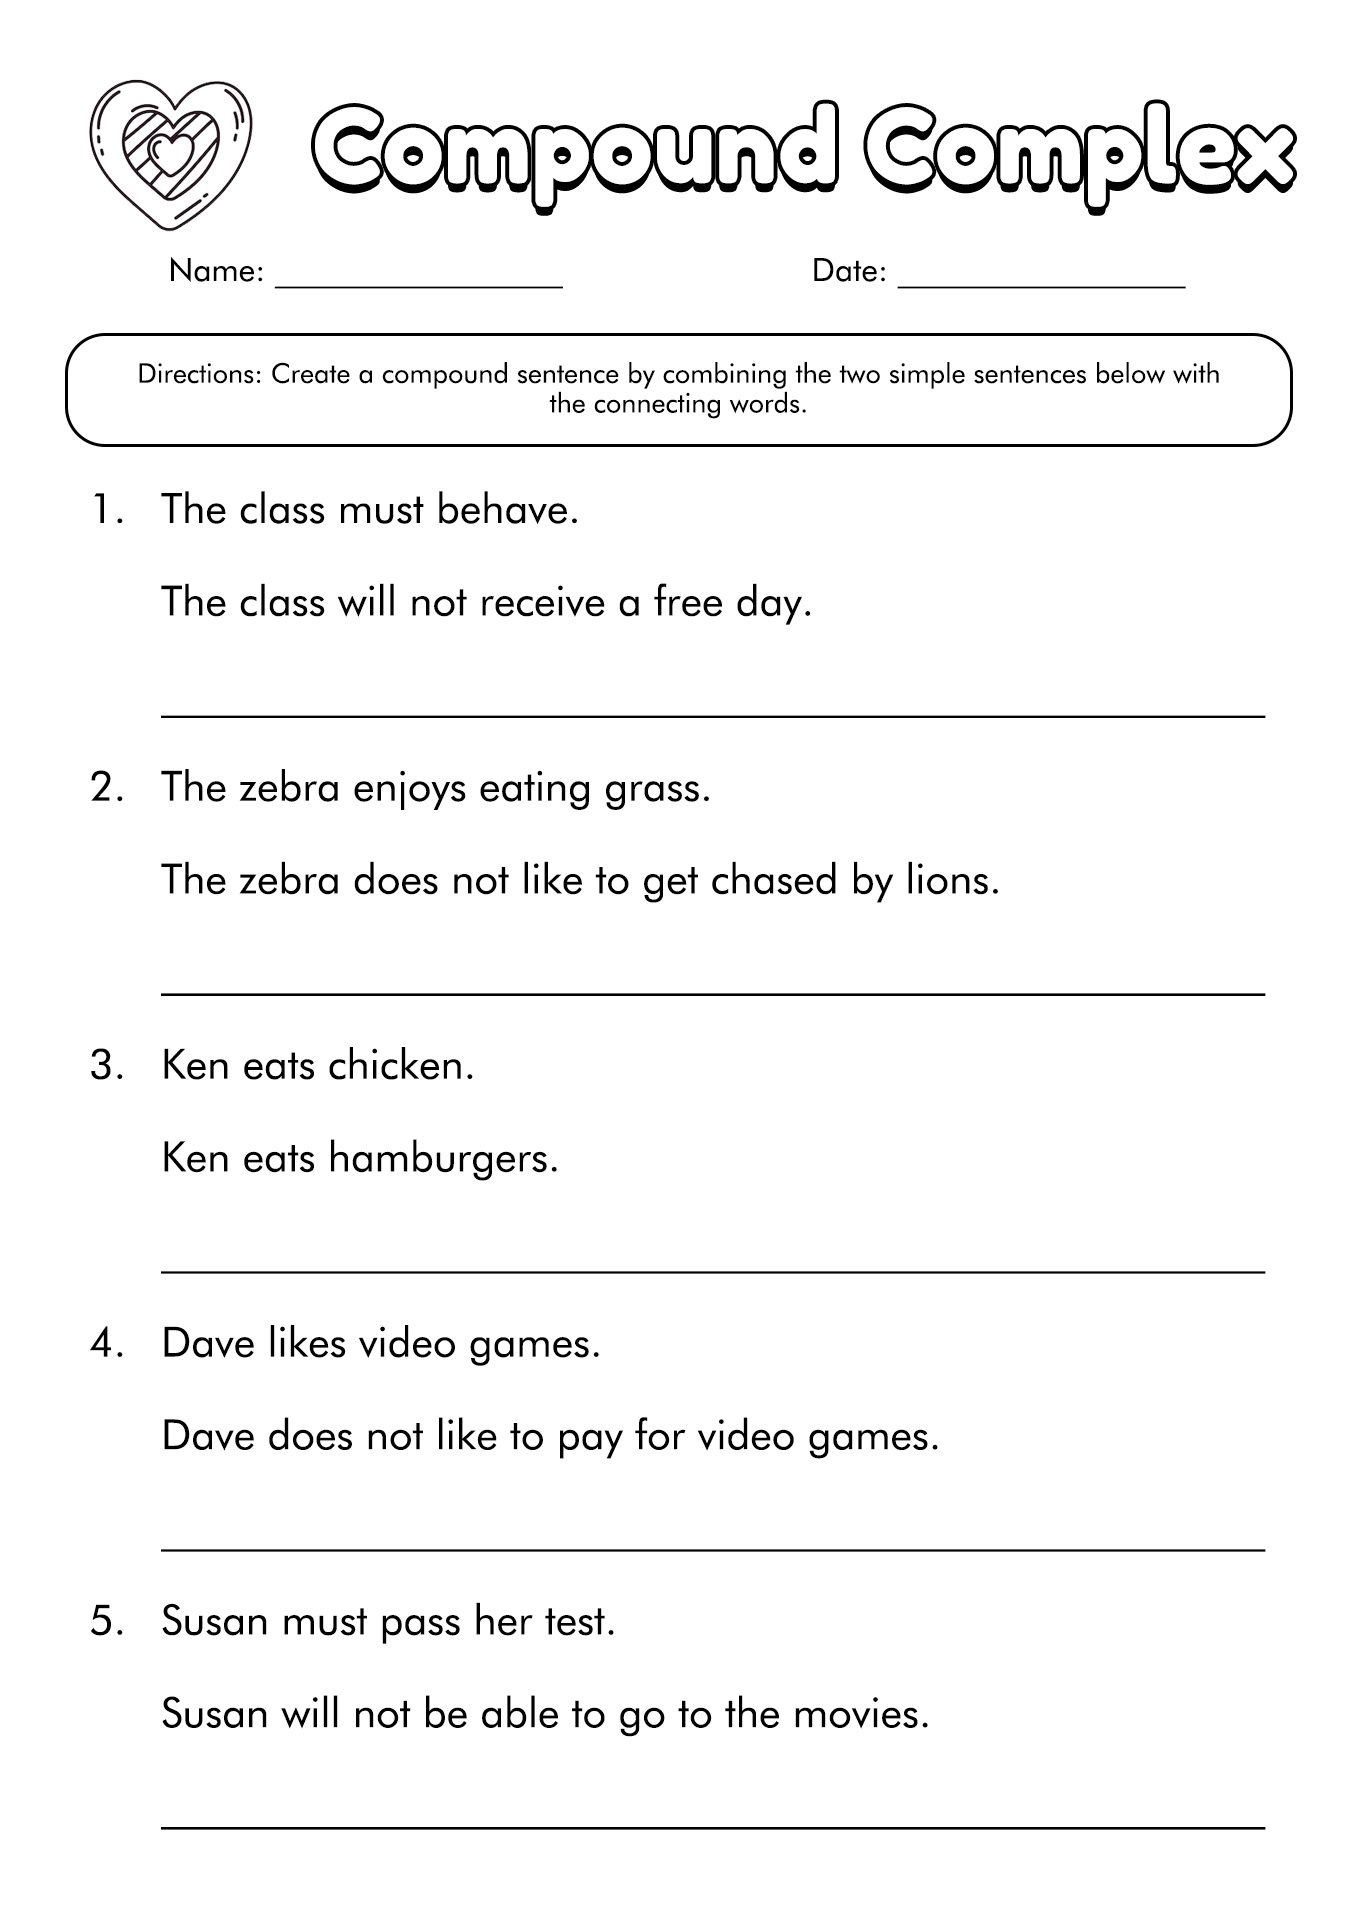 simple-and-complete-predicate-worksheets